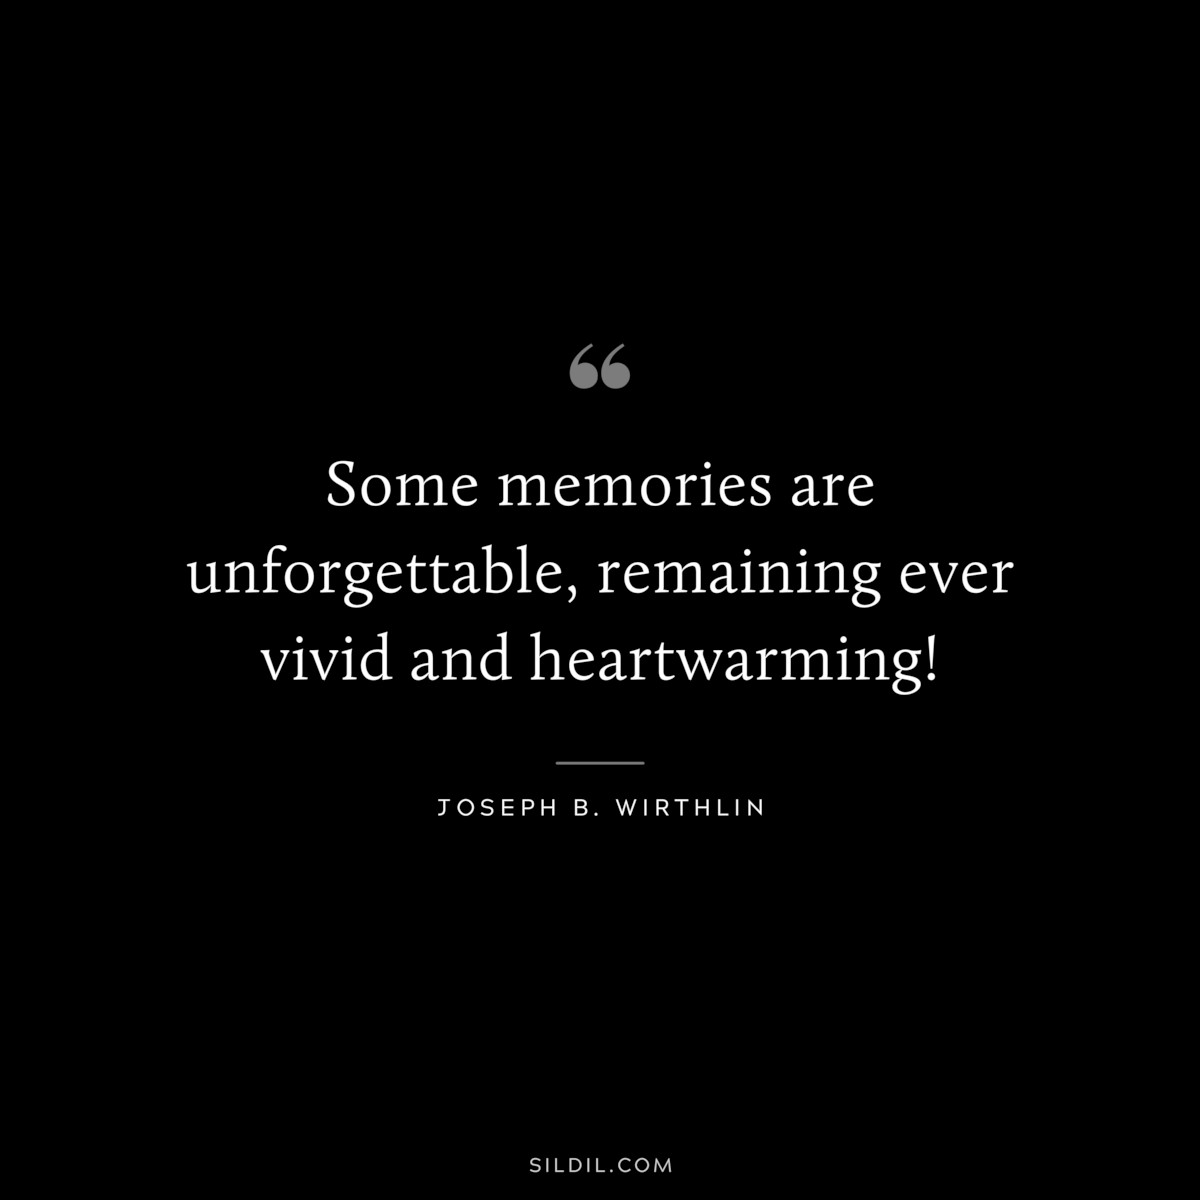 Some memories are unforgettable, remaining ever vivid and heartwarming! ― Joseph B. Wirthlin